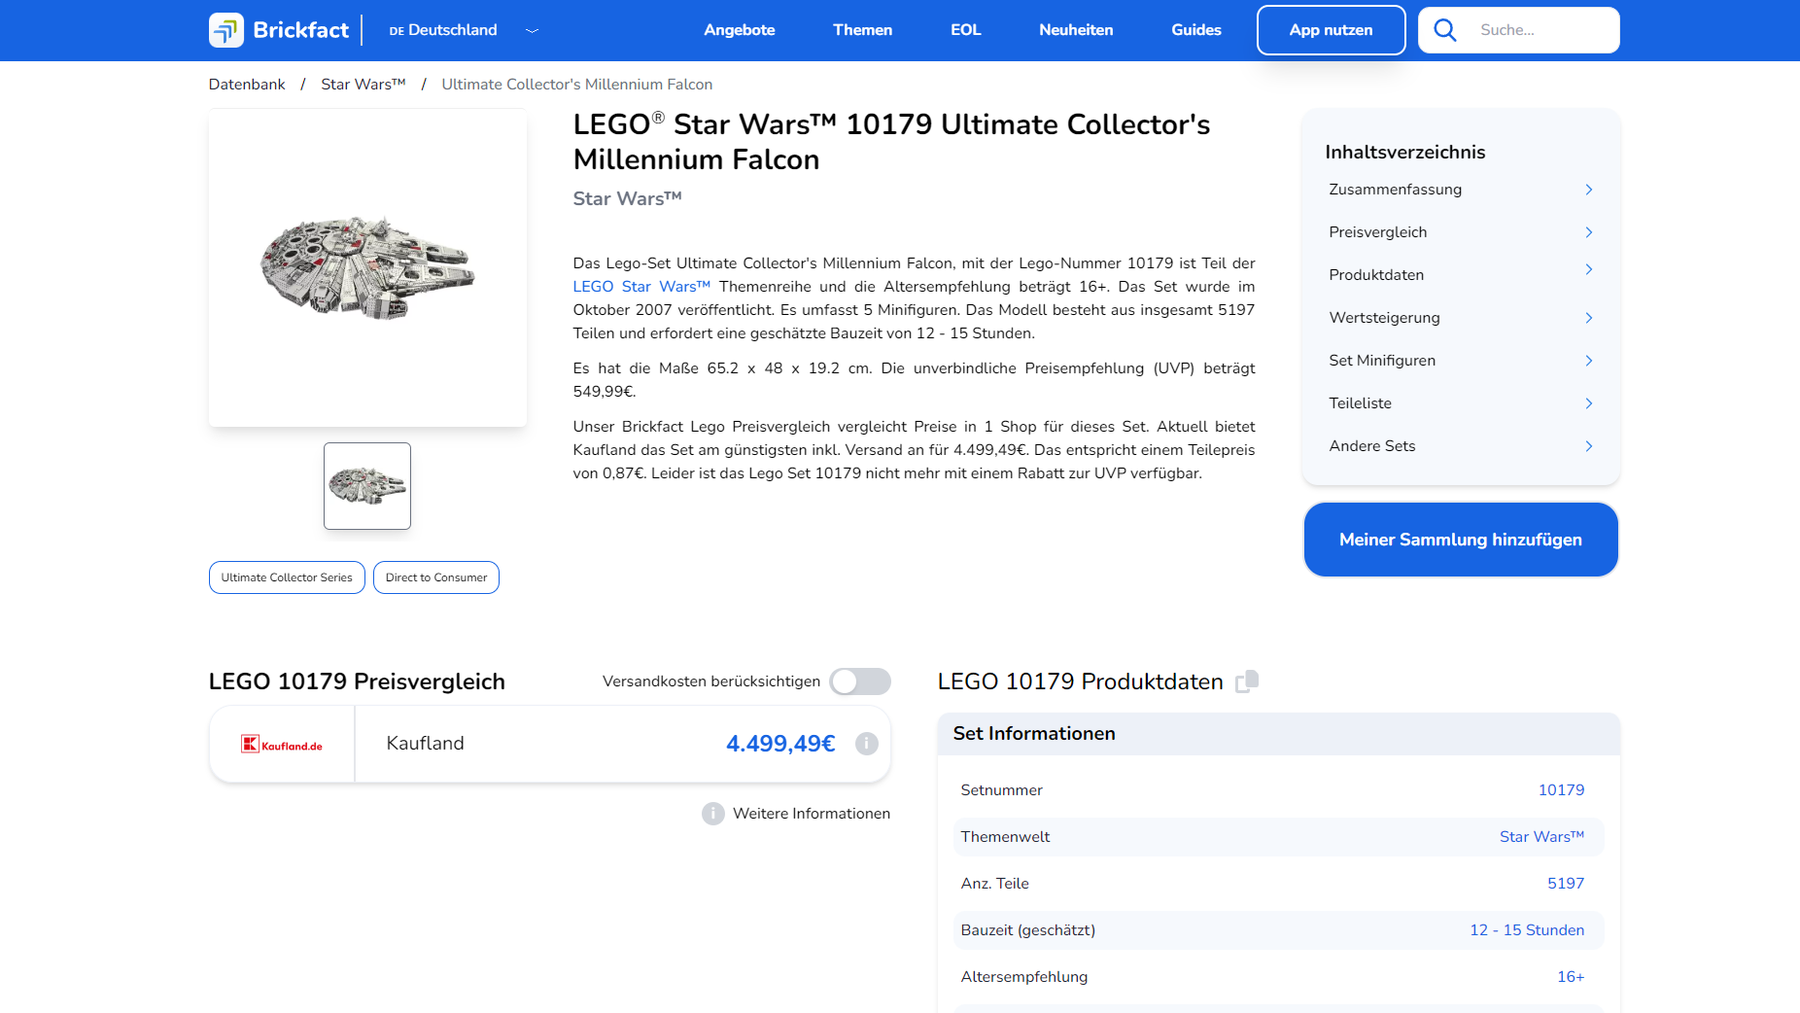 Lego Star Wars is expensive